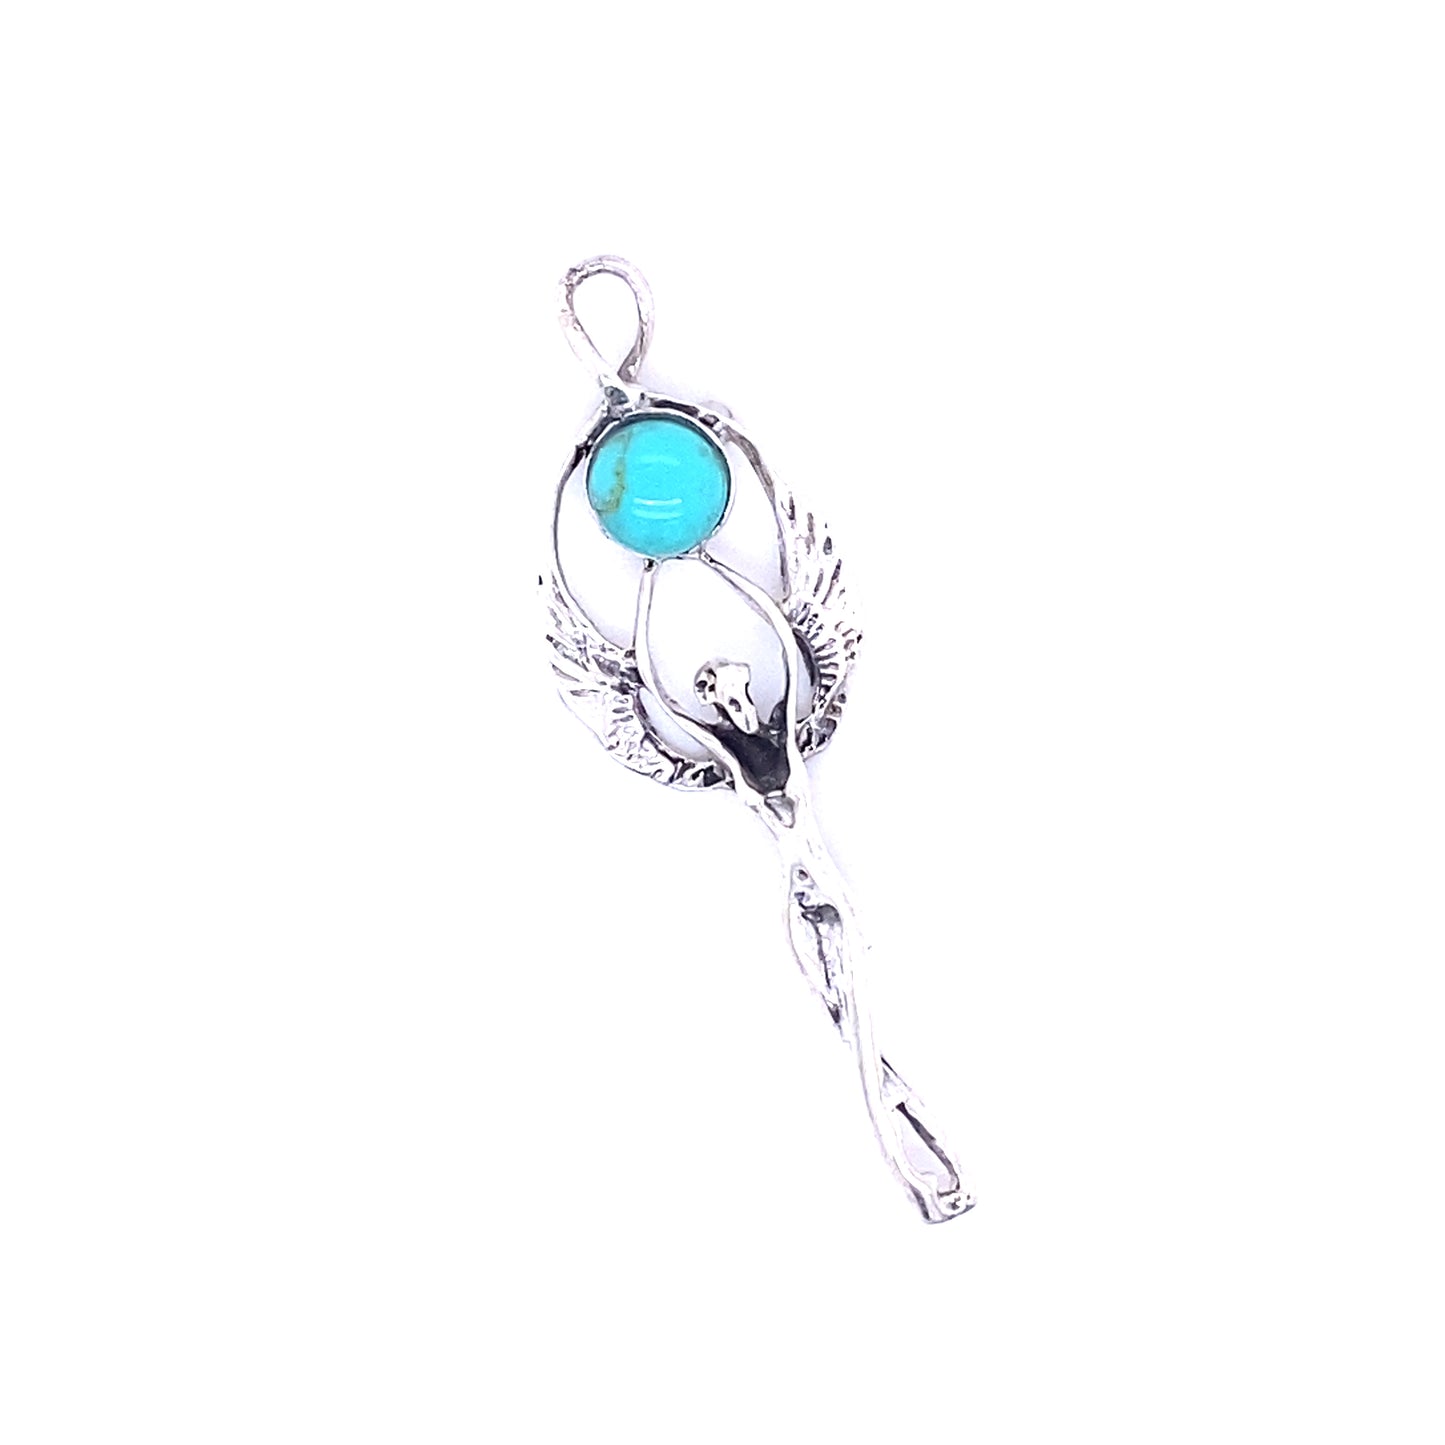 A Super Silver Fairy Angel Turquoise Pendant.
